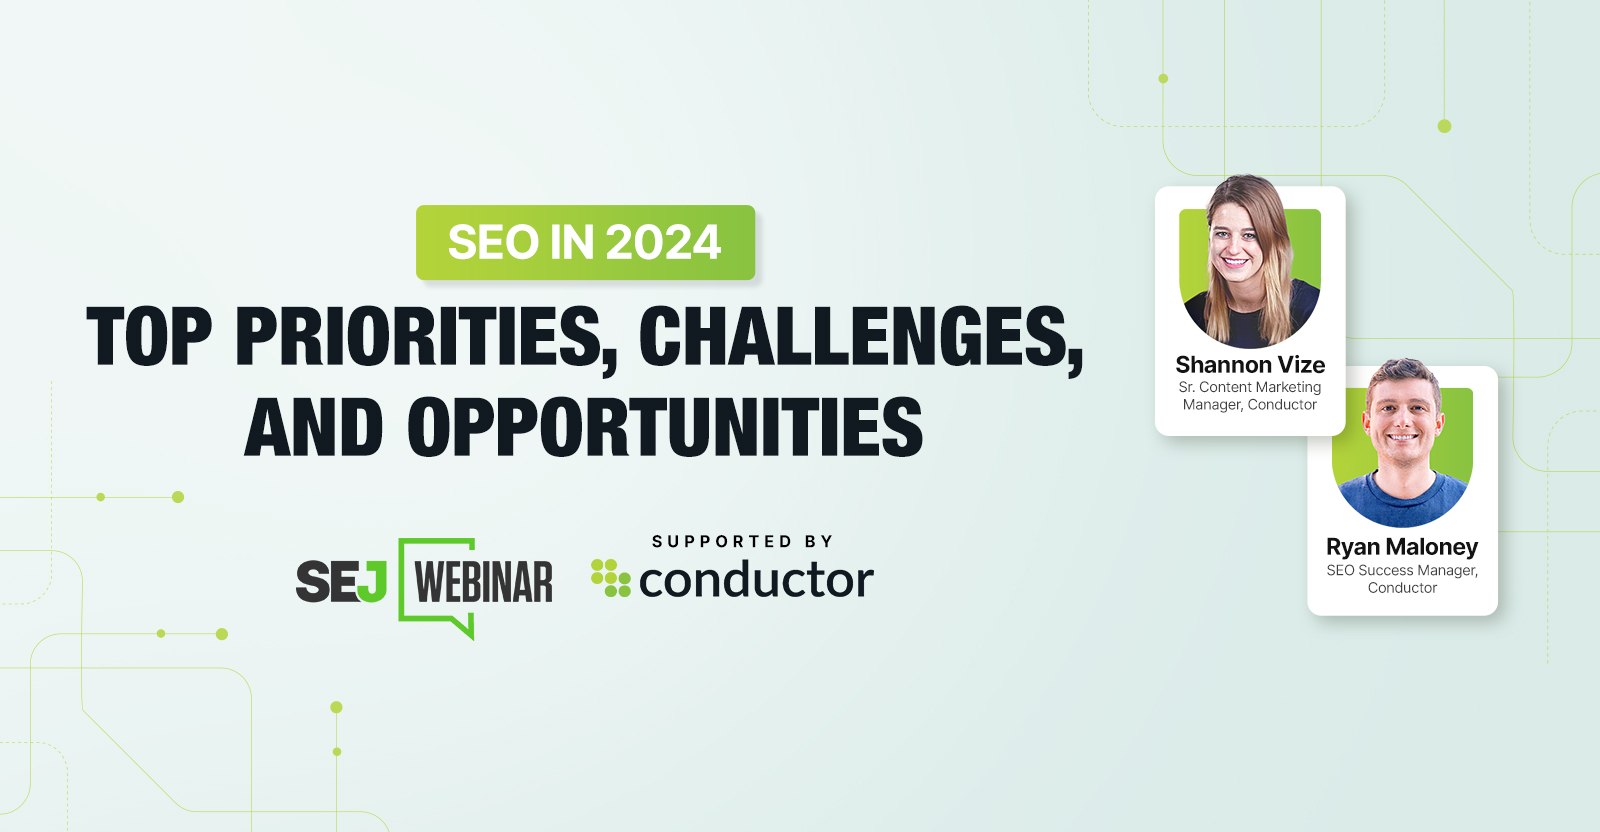 SEO in 2024: Priorities, Challenges and Opportunities